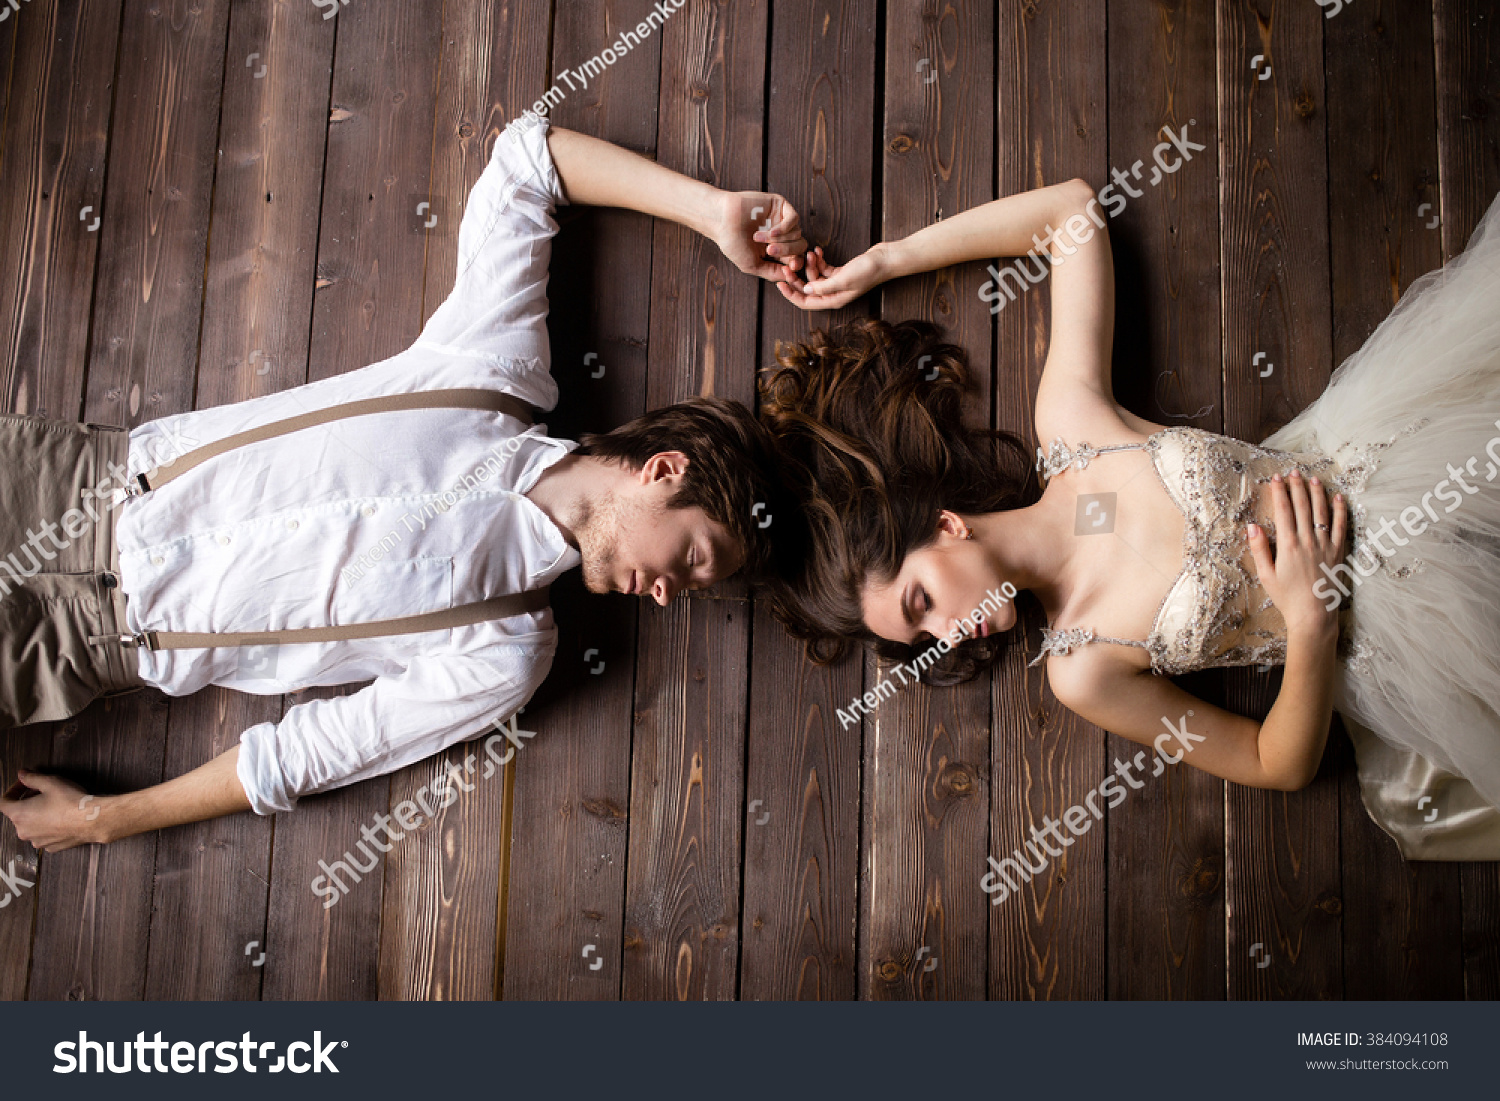 couple lying on the wooden floor and touching her hands, the bride in beige pants with suspenders and a white shirt, the bride in a beige dress #384094108